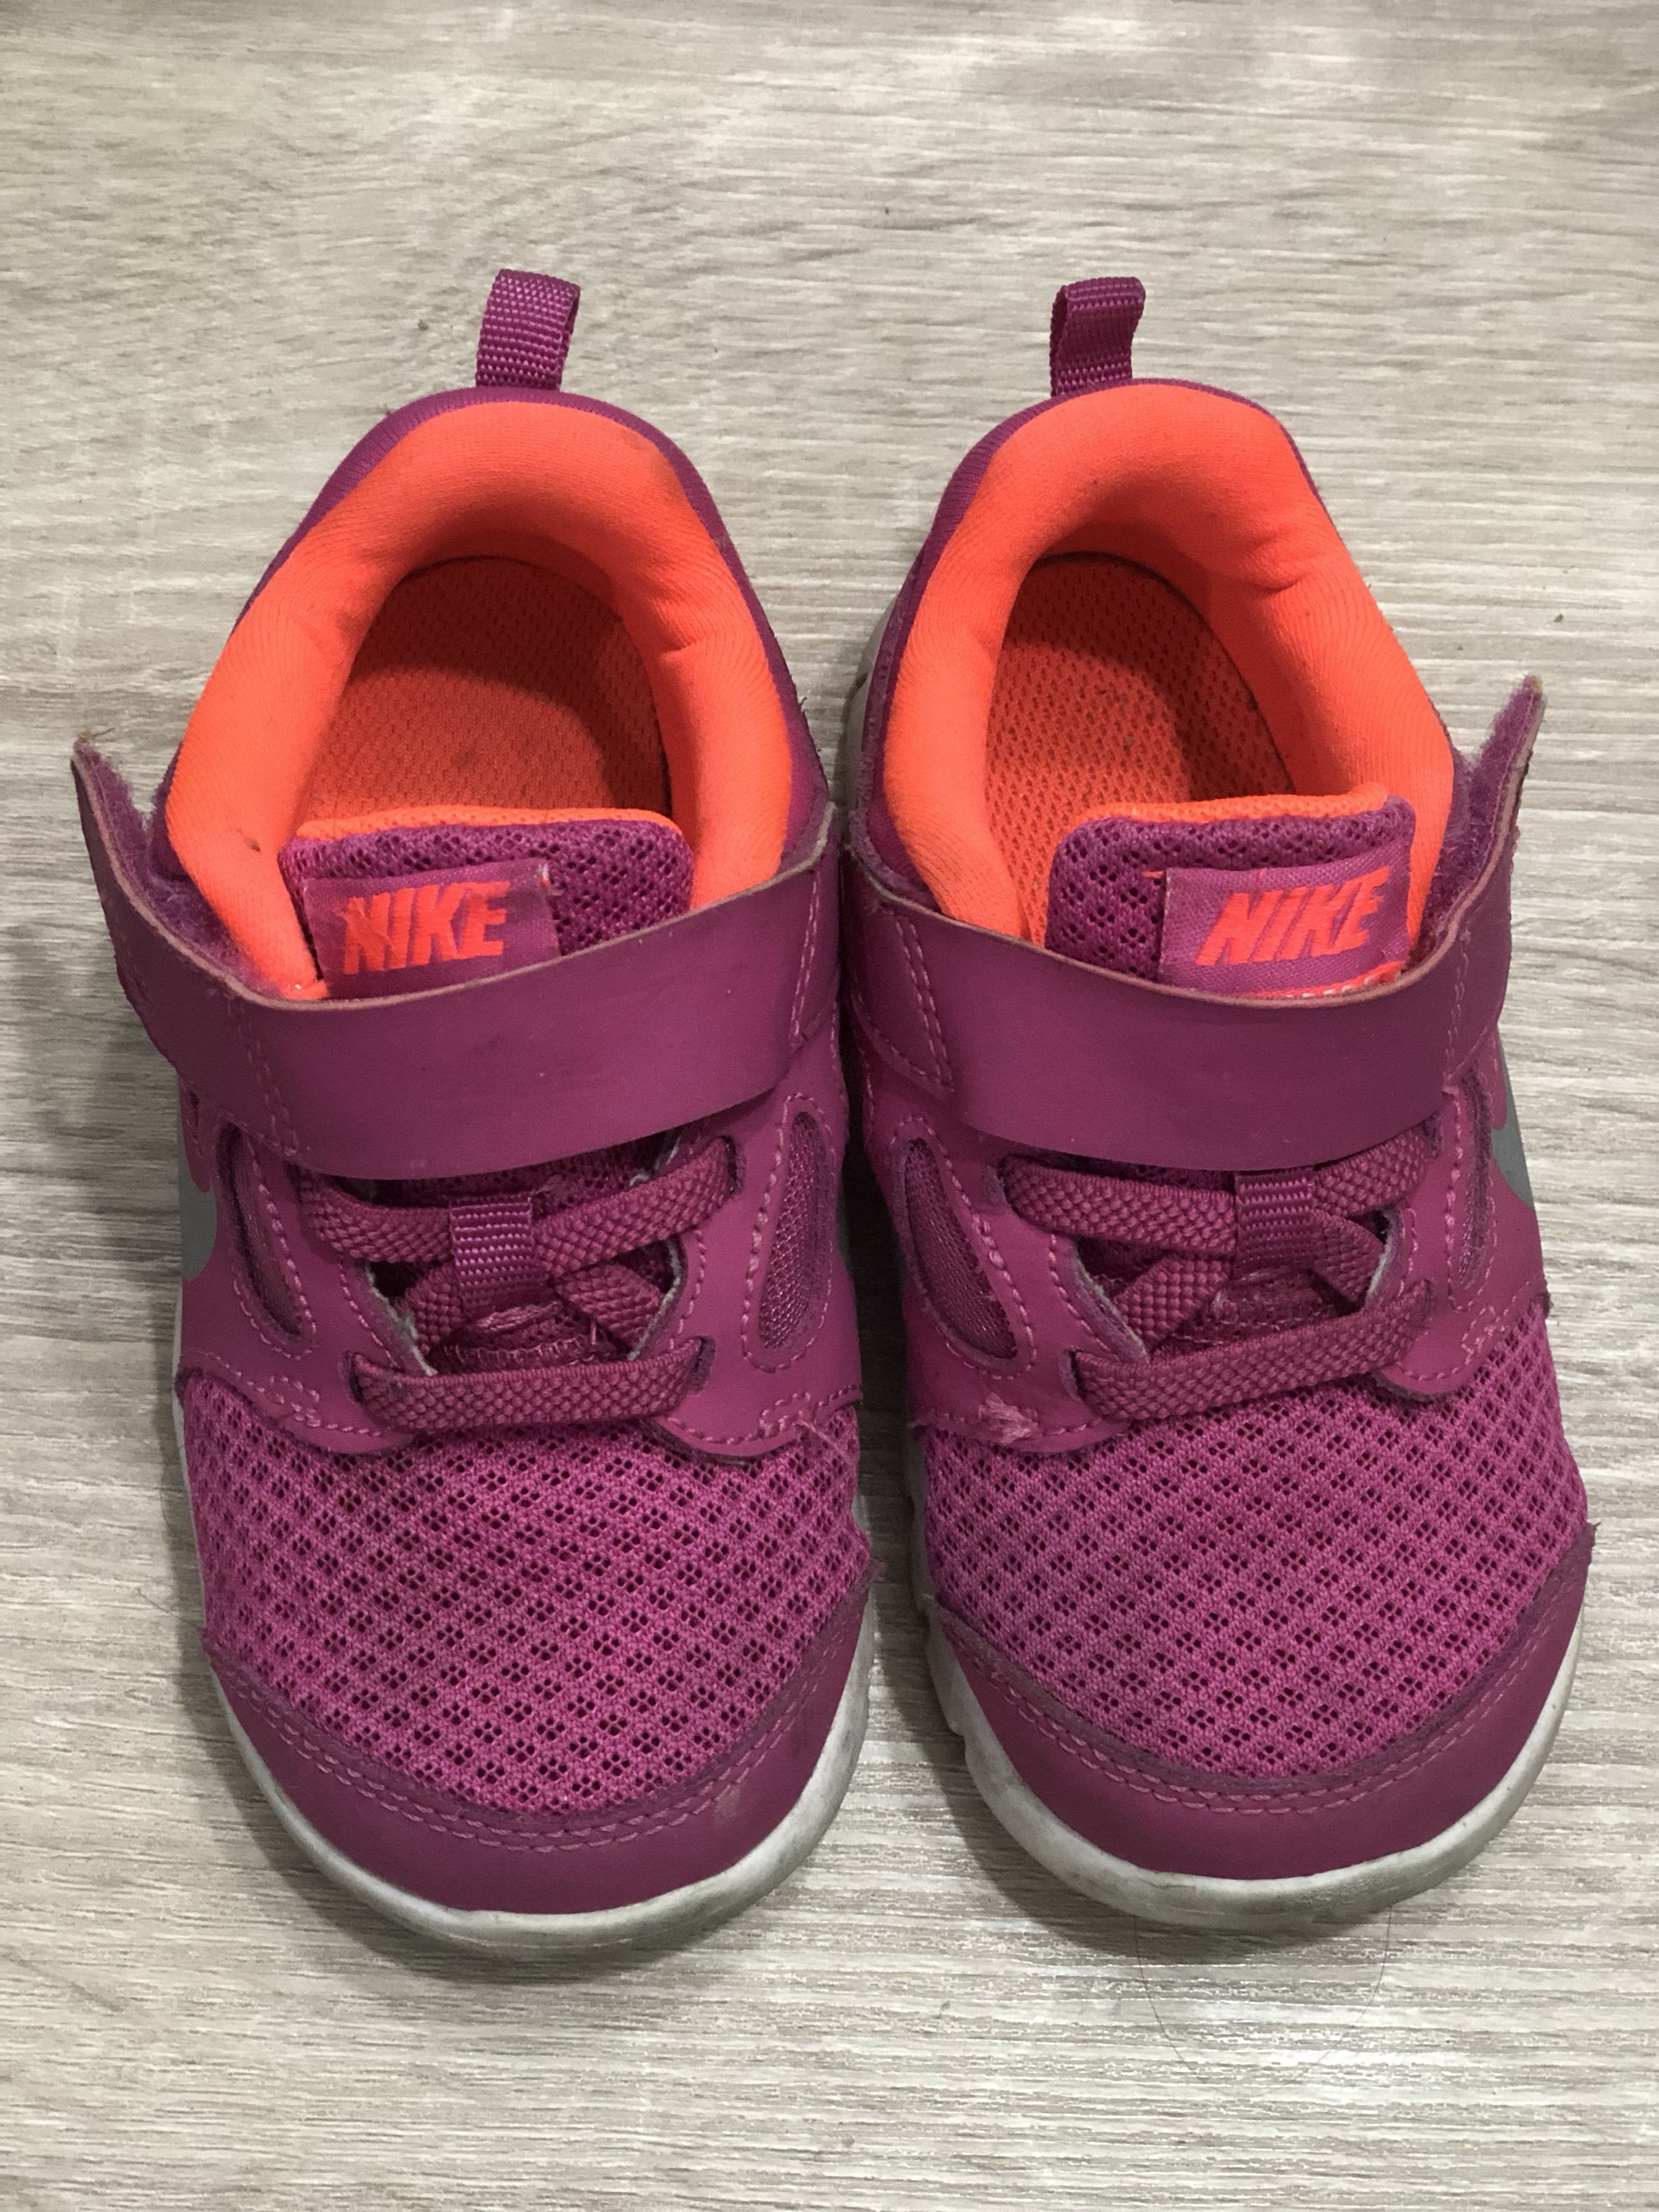 nike rubber shoes for girls